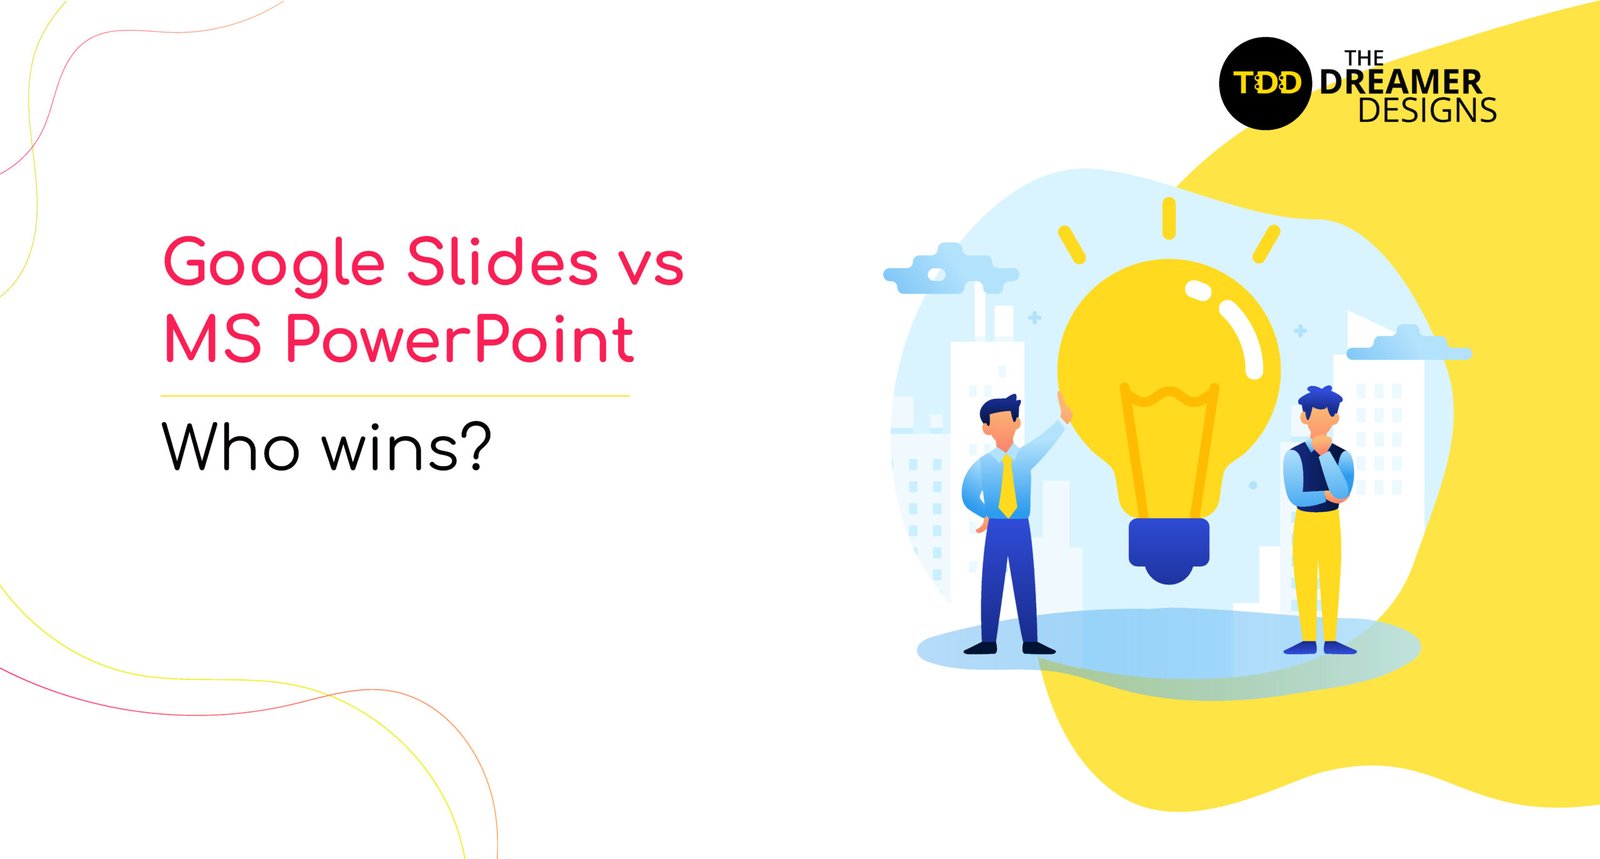 Google slides vs MS PowerPoint – who wins?